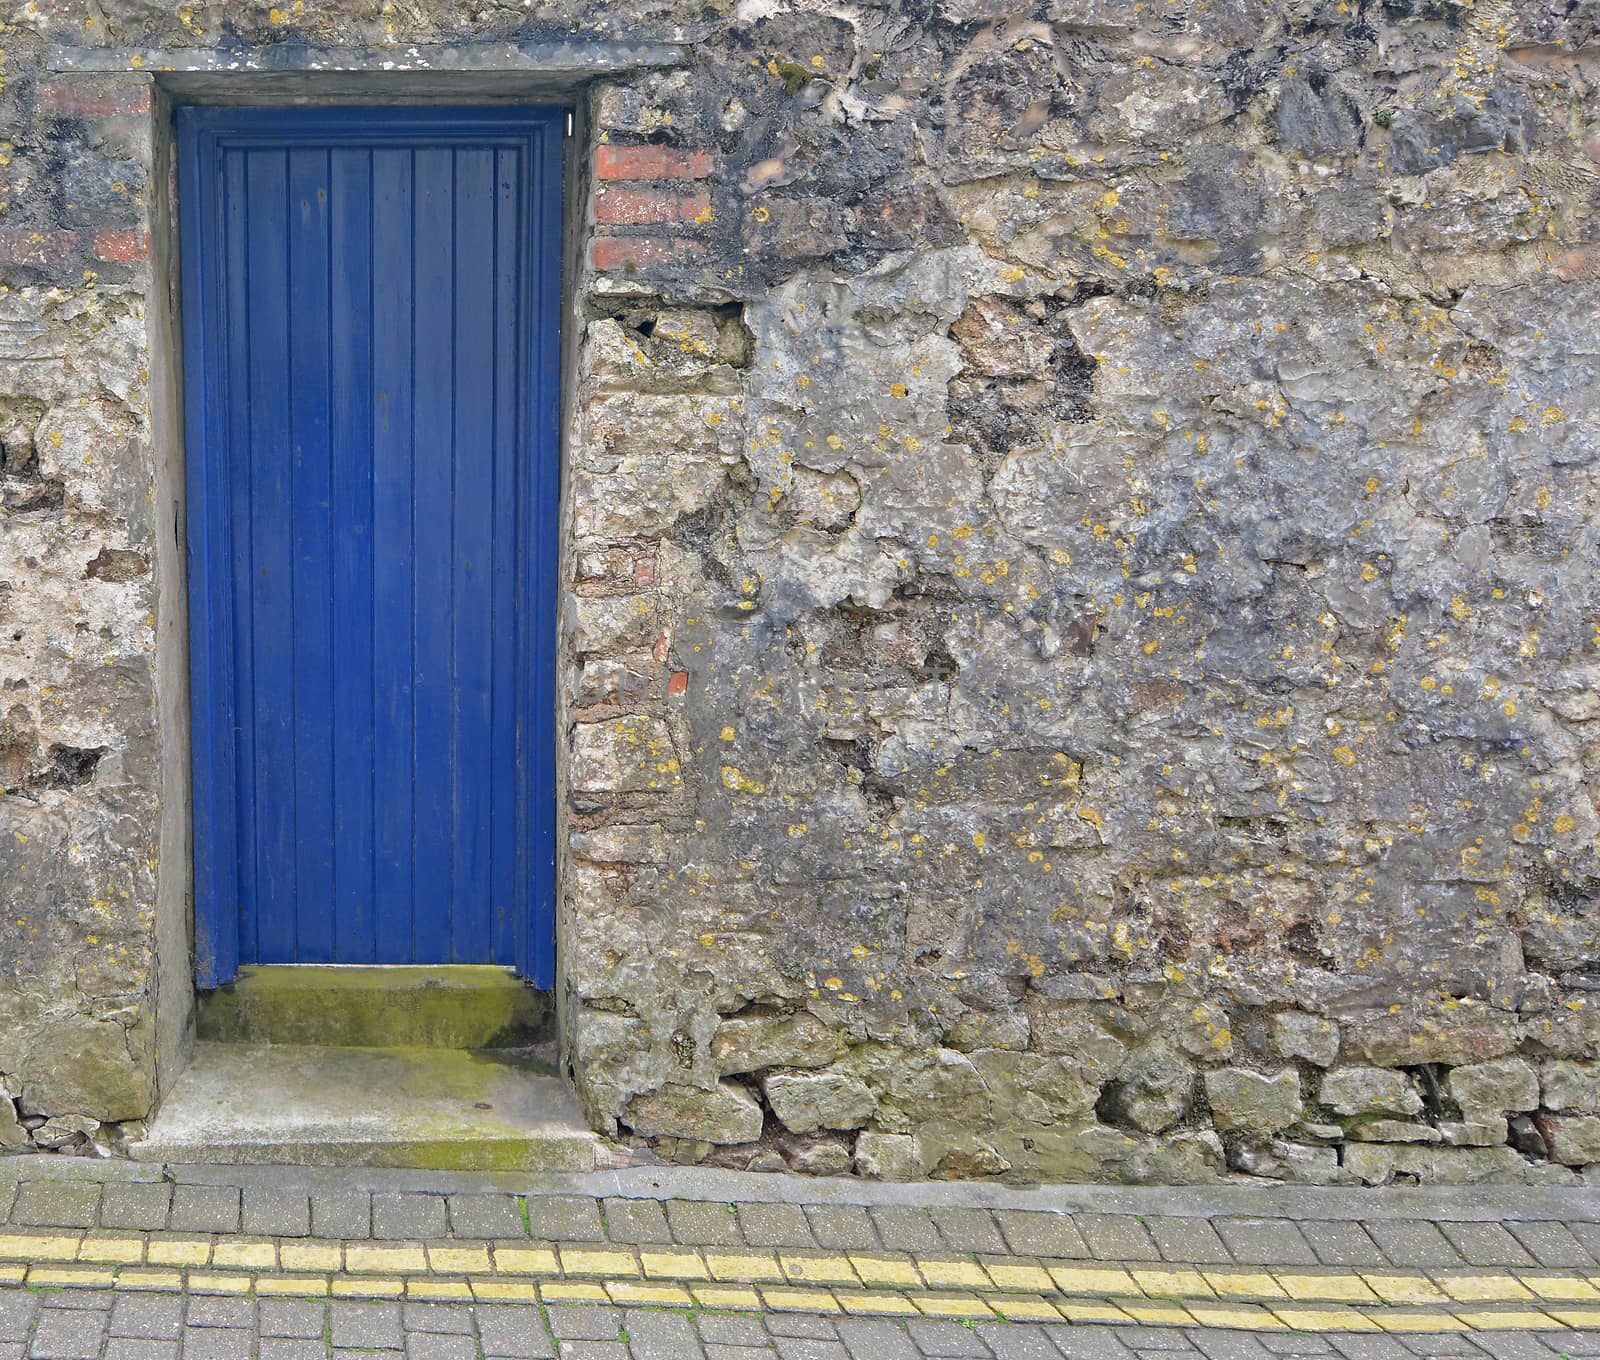 A blue, wooden door, set into a stone wall, in front of double yellow lines